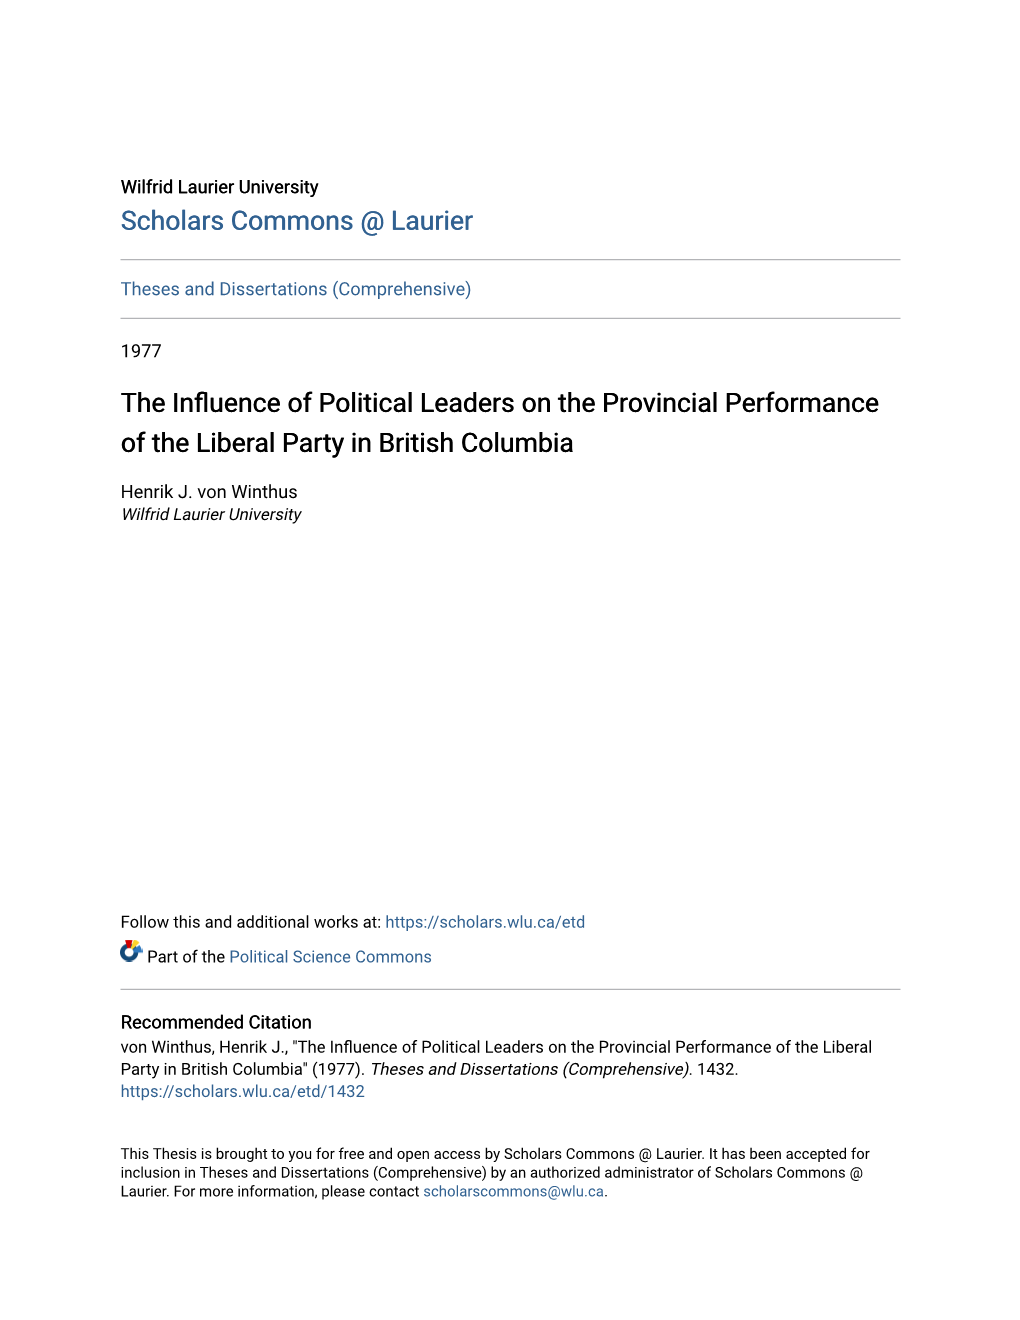 The Influence of Political Leaders on the Provincial Performance of the Liberal Party in British Columbia